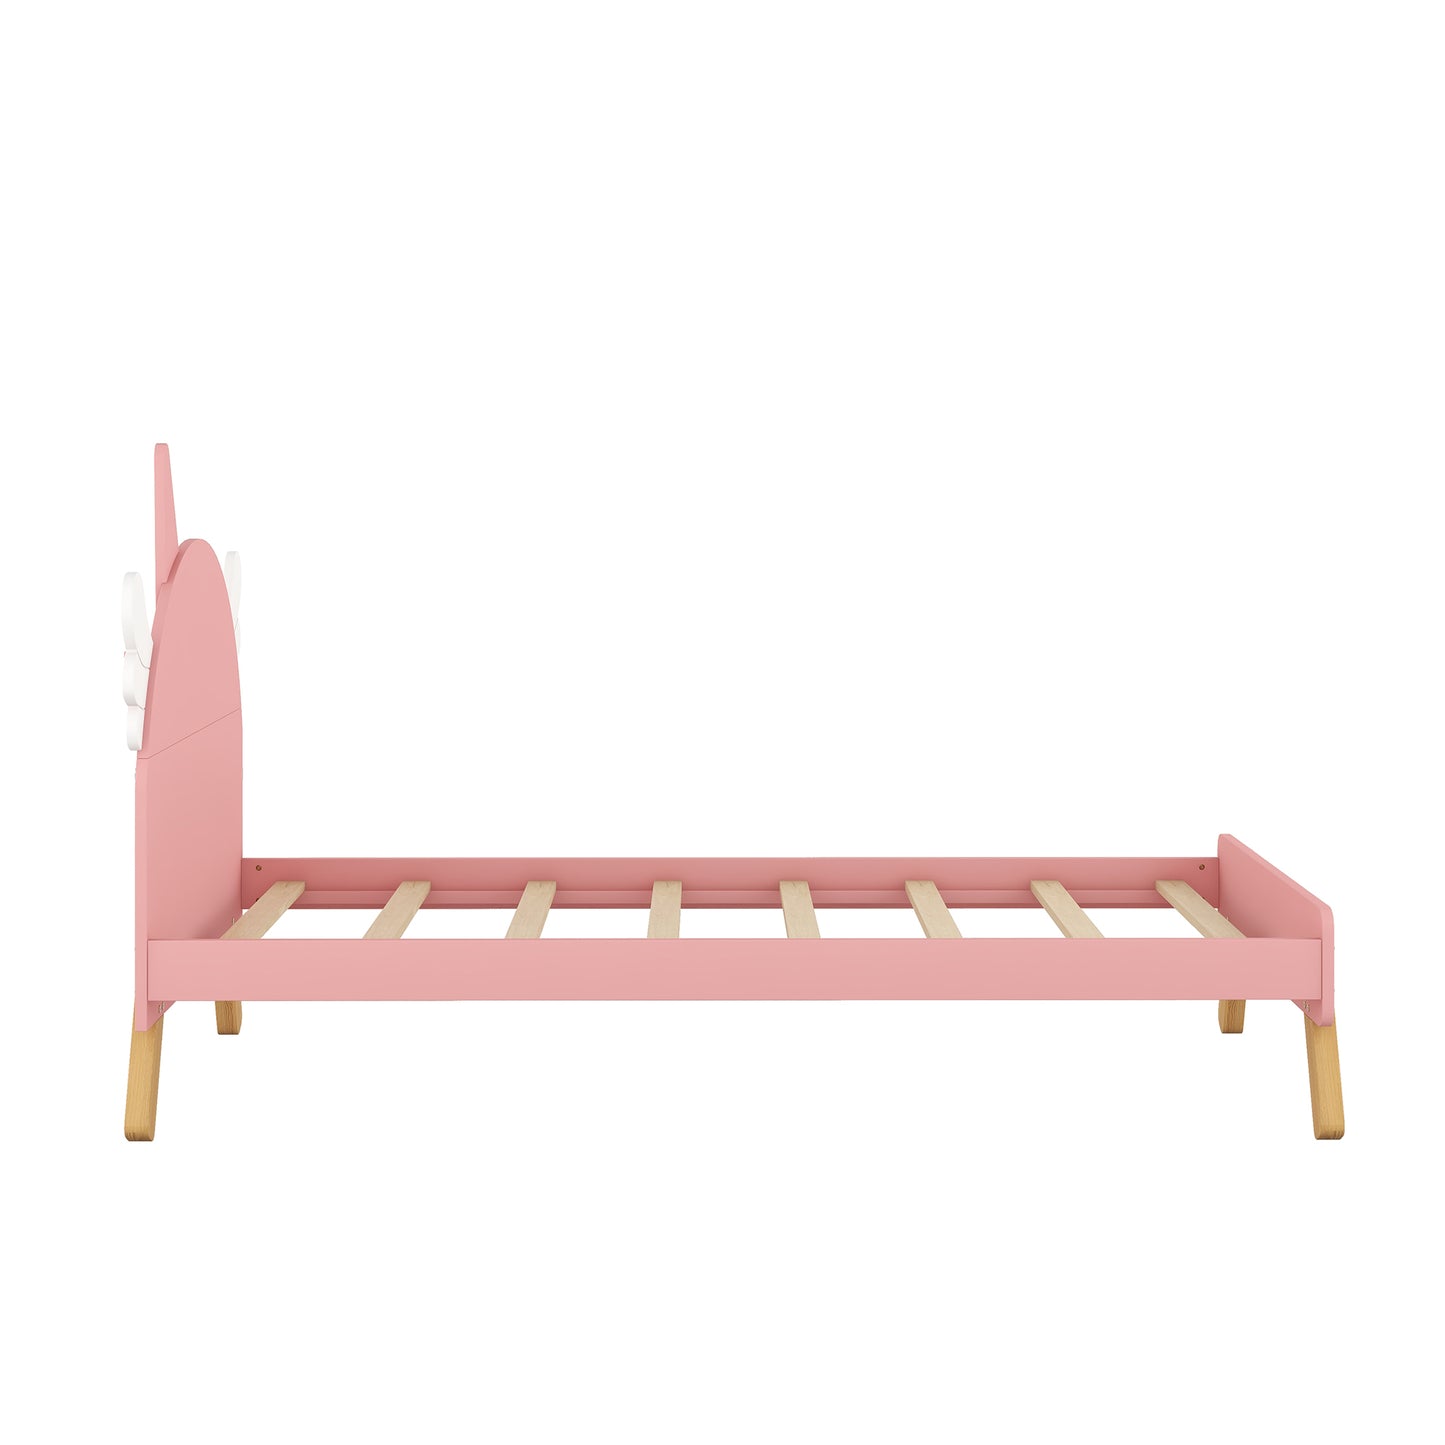 Wooden Cute Bed With Unicorn Shape Headboard,Twin Size Platform Bed,Pink